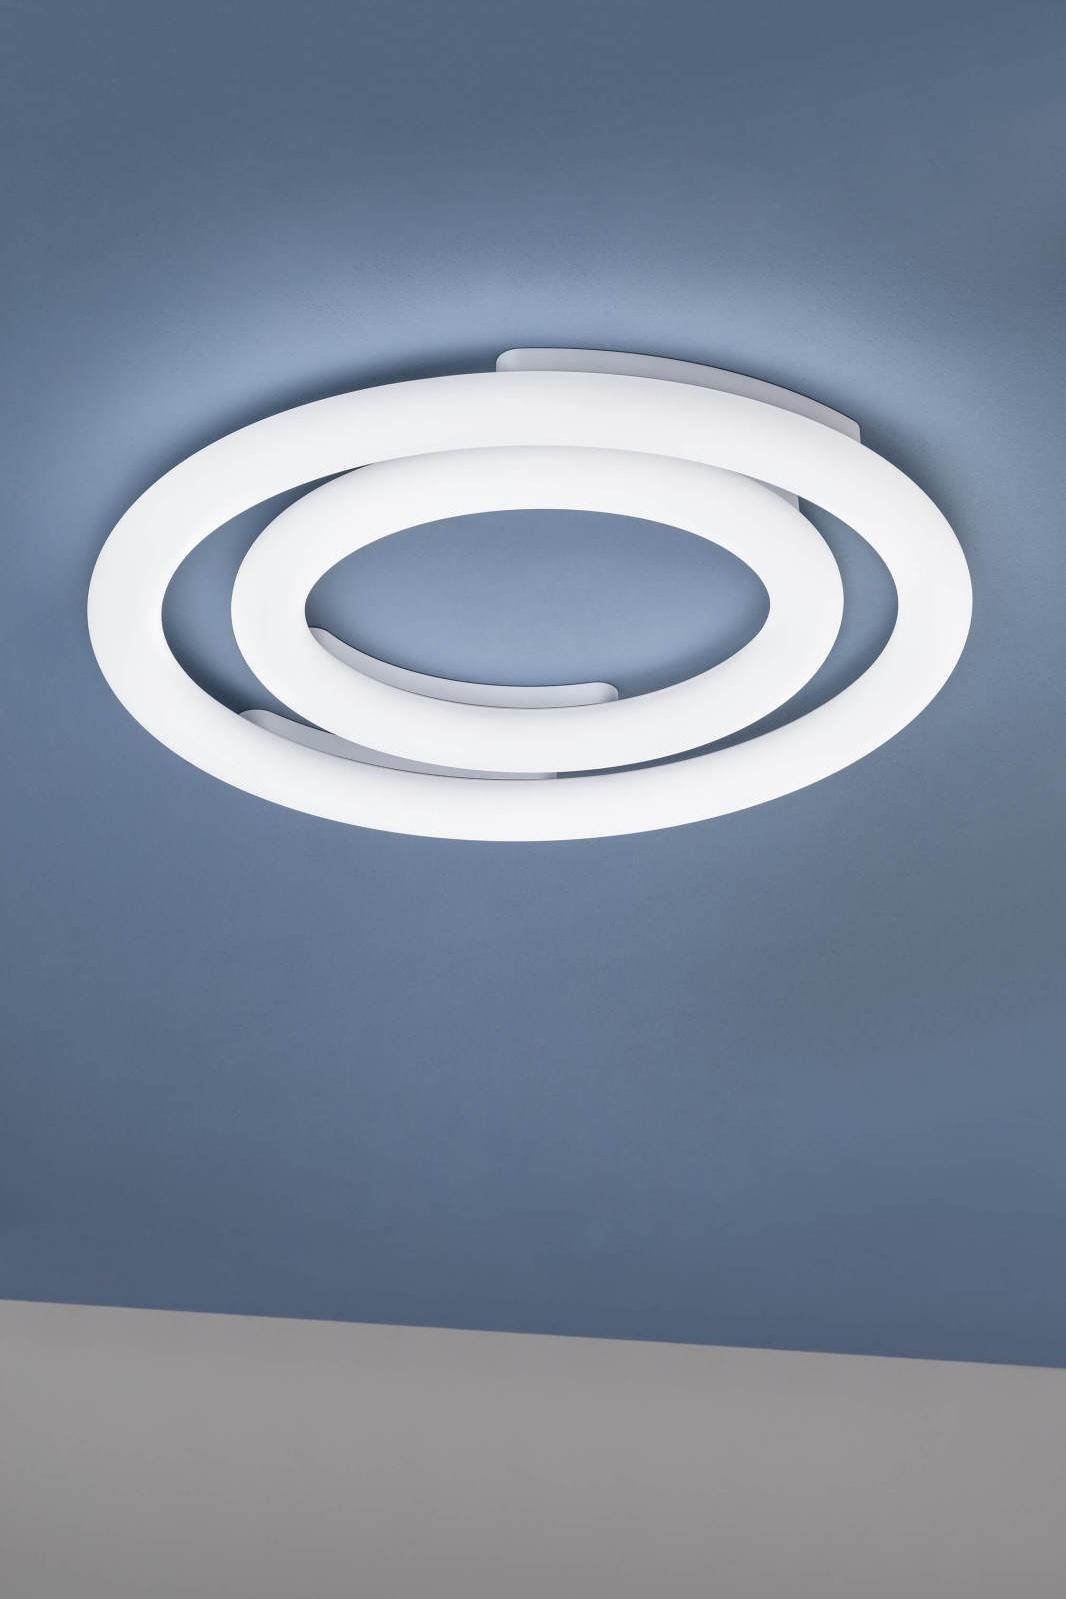 Gallery Product Polo Ceiling Linealightgroup 1280X1920 1